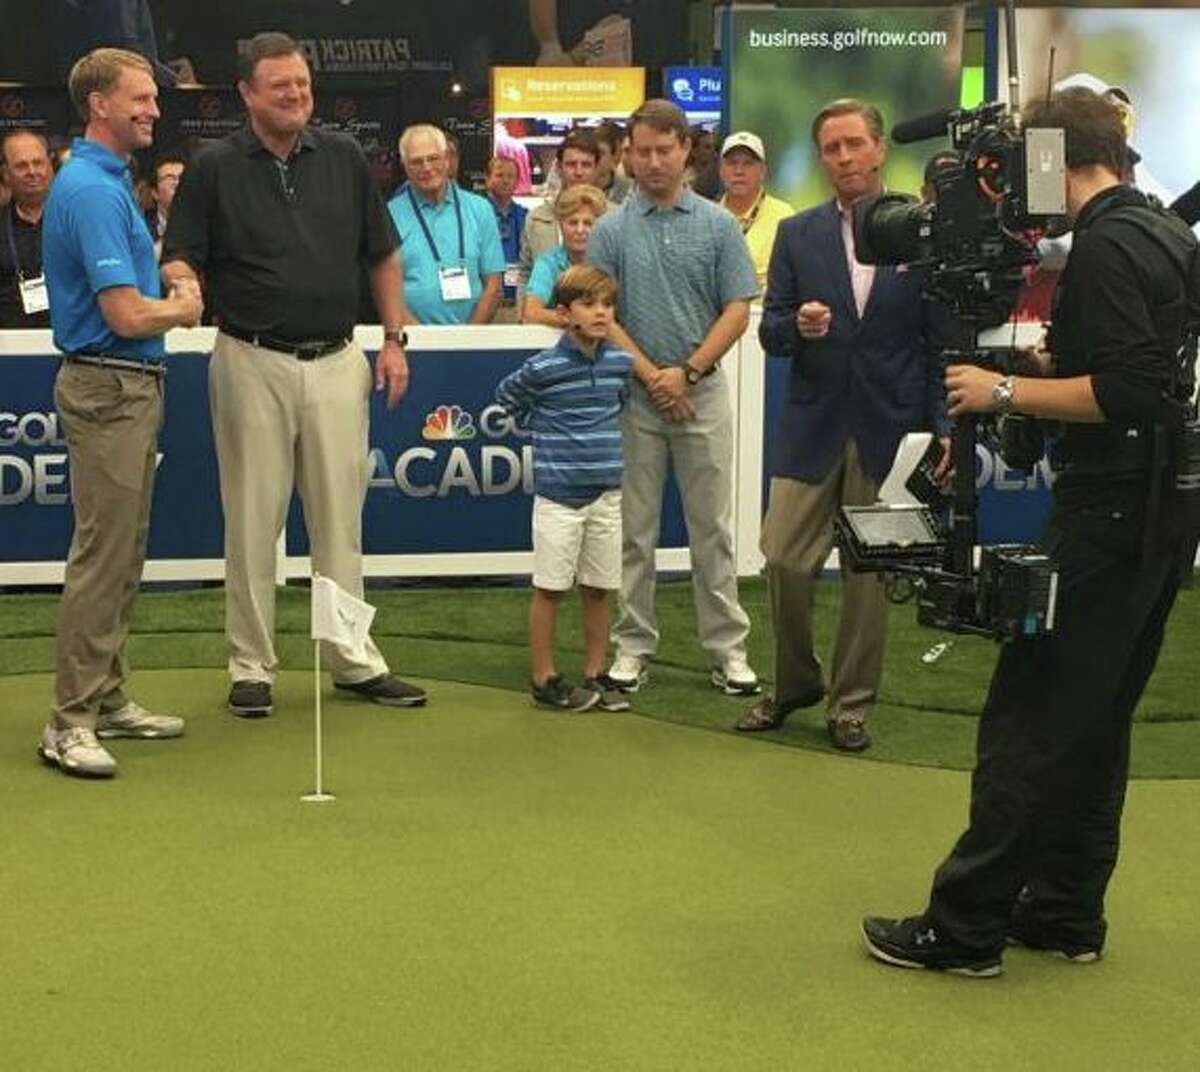 Saratoga Springs coach earning national attention on Golf Channel